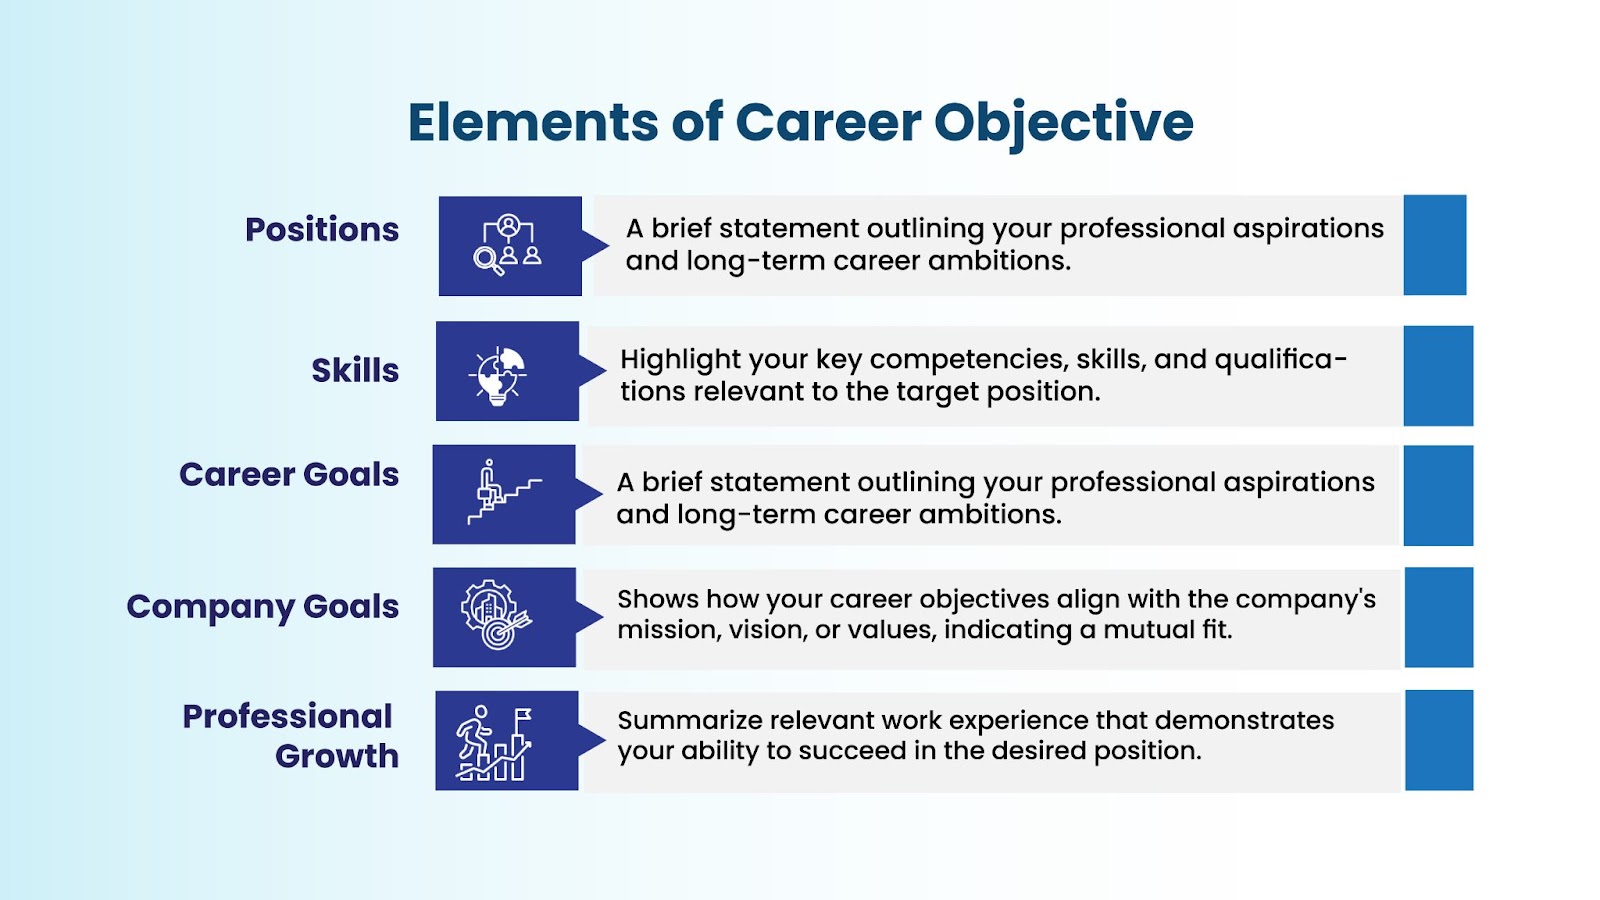  an infographic representing elements of career objective